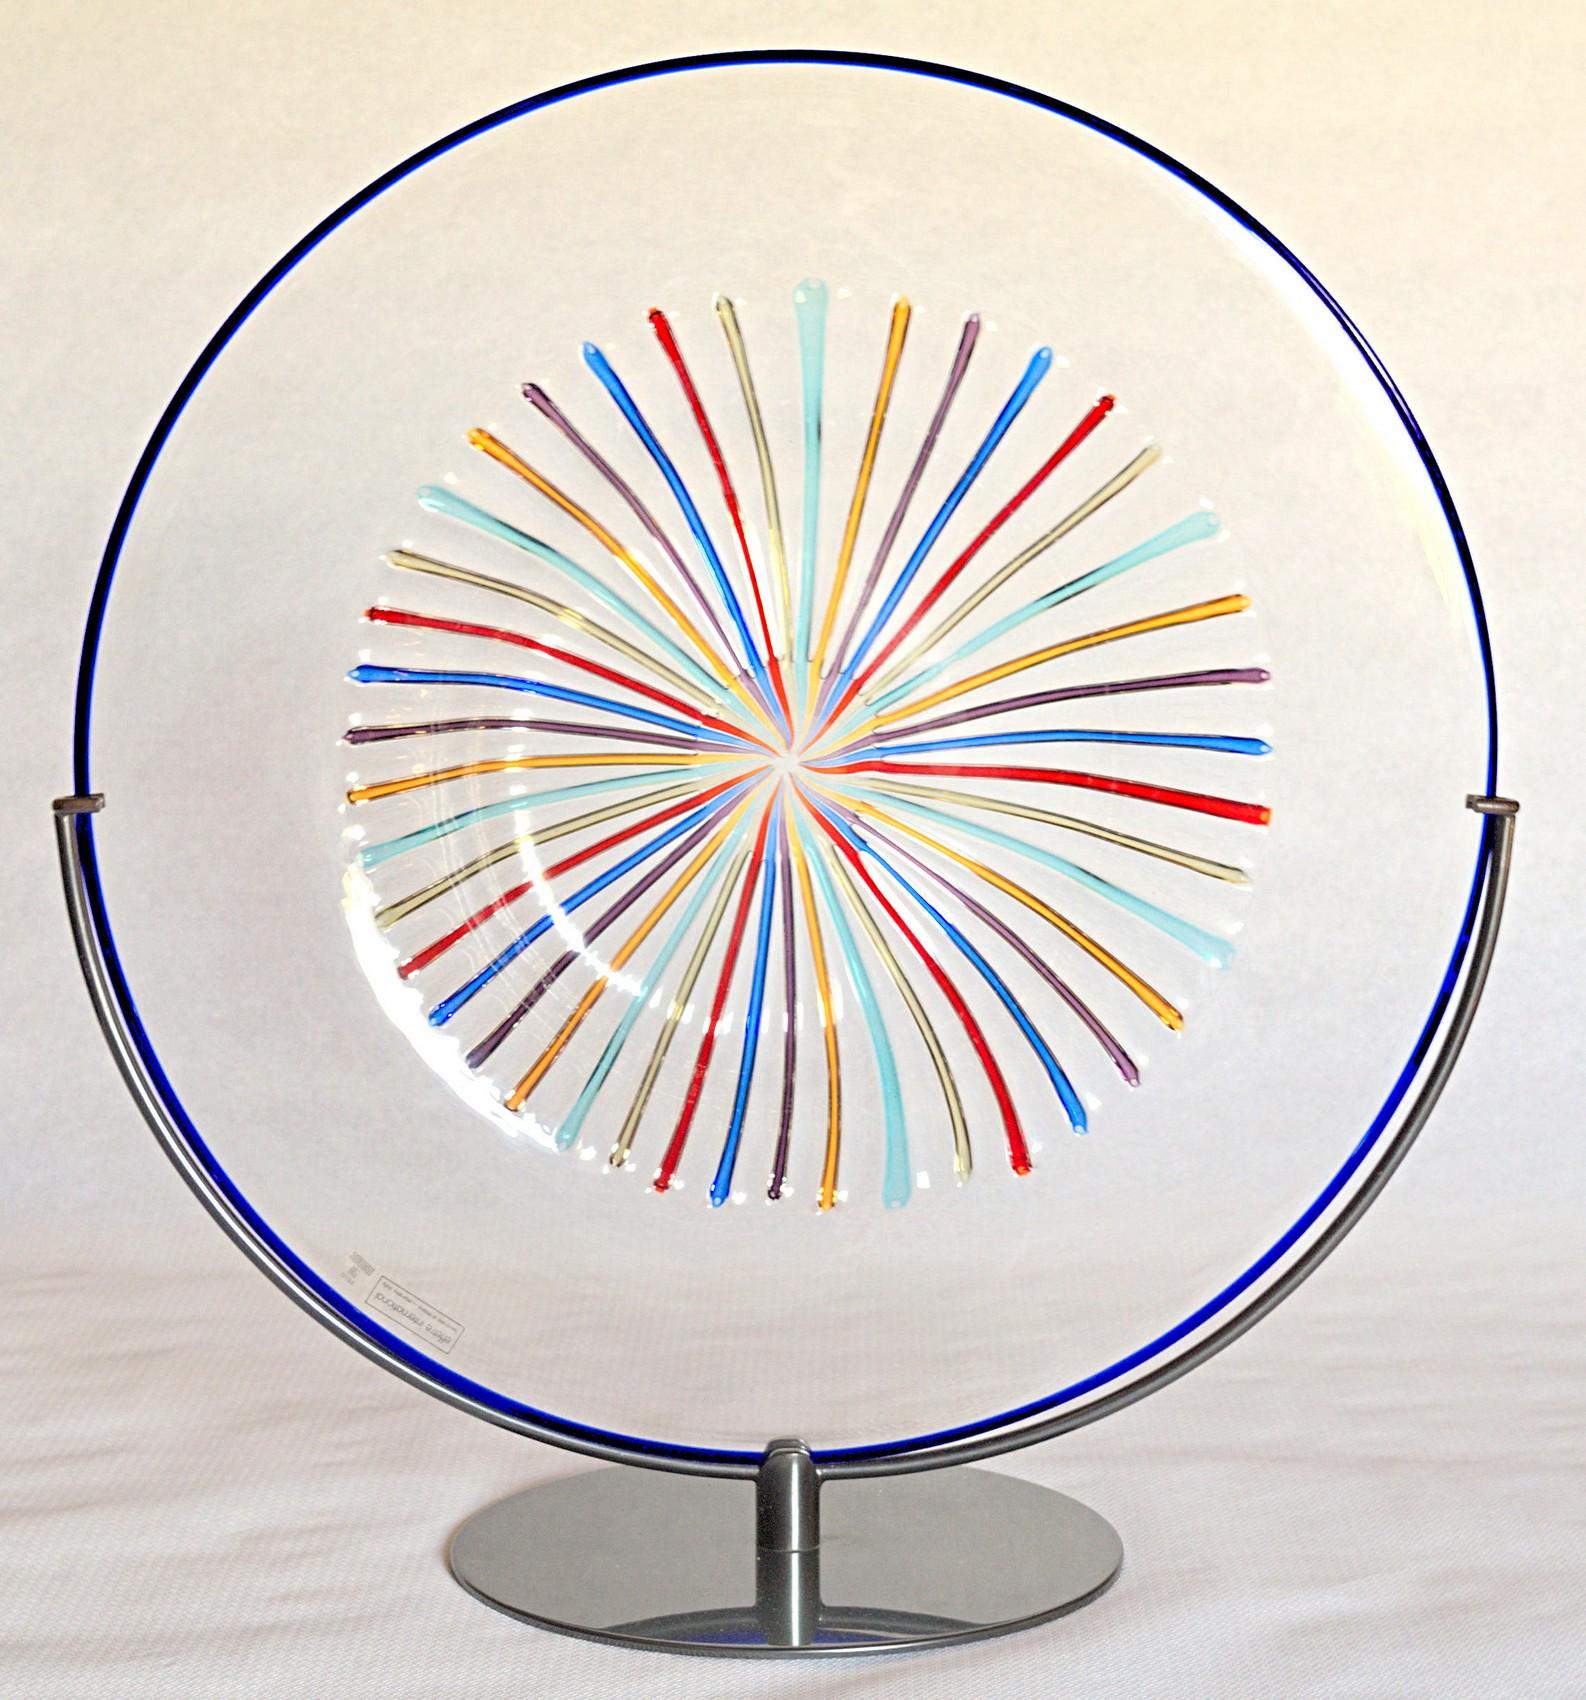 Original Lino Tagliapietra charger with original stand, 1986. Rare and unique. Part of the rainbow collection created at Effetre International in the mid-1980s.
Designed in collaboration with Marina Angelin 1982-1986.

Charger/plate, hand opened